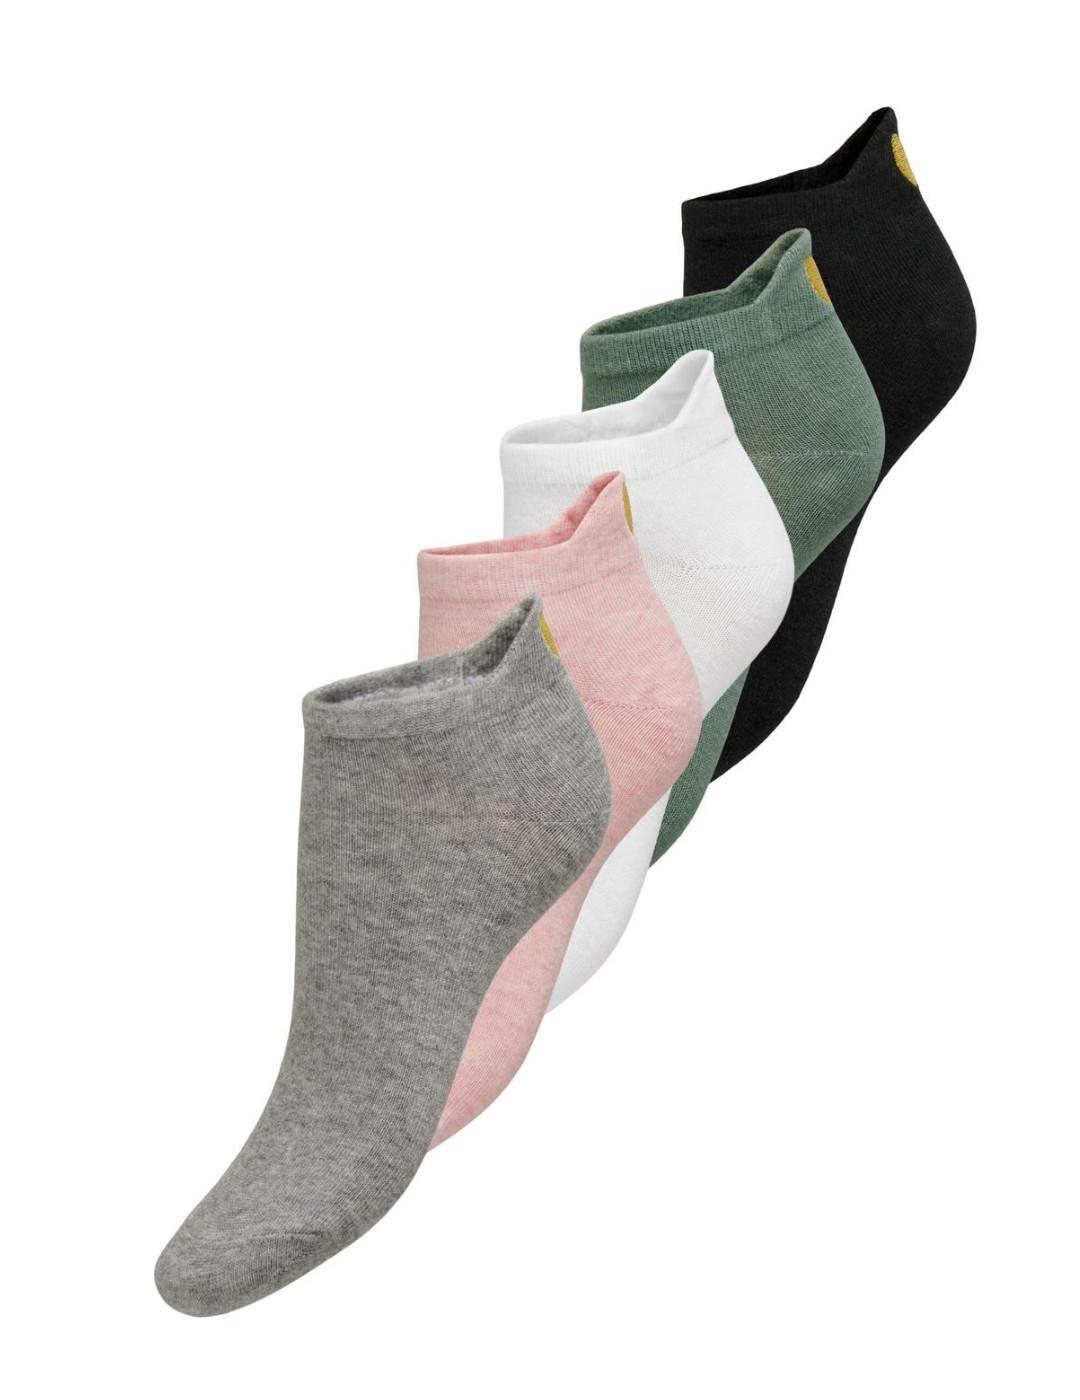 Pack de 5 calcetines Only Lea varios colores tobillero mujer